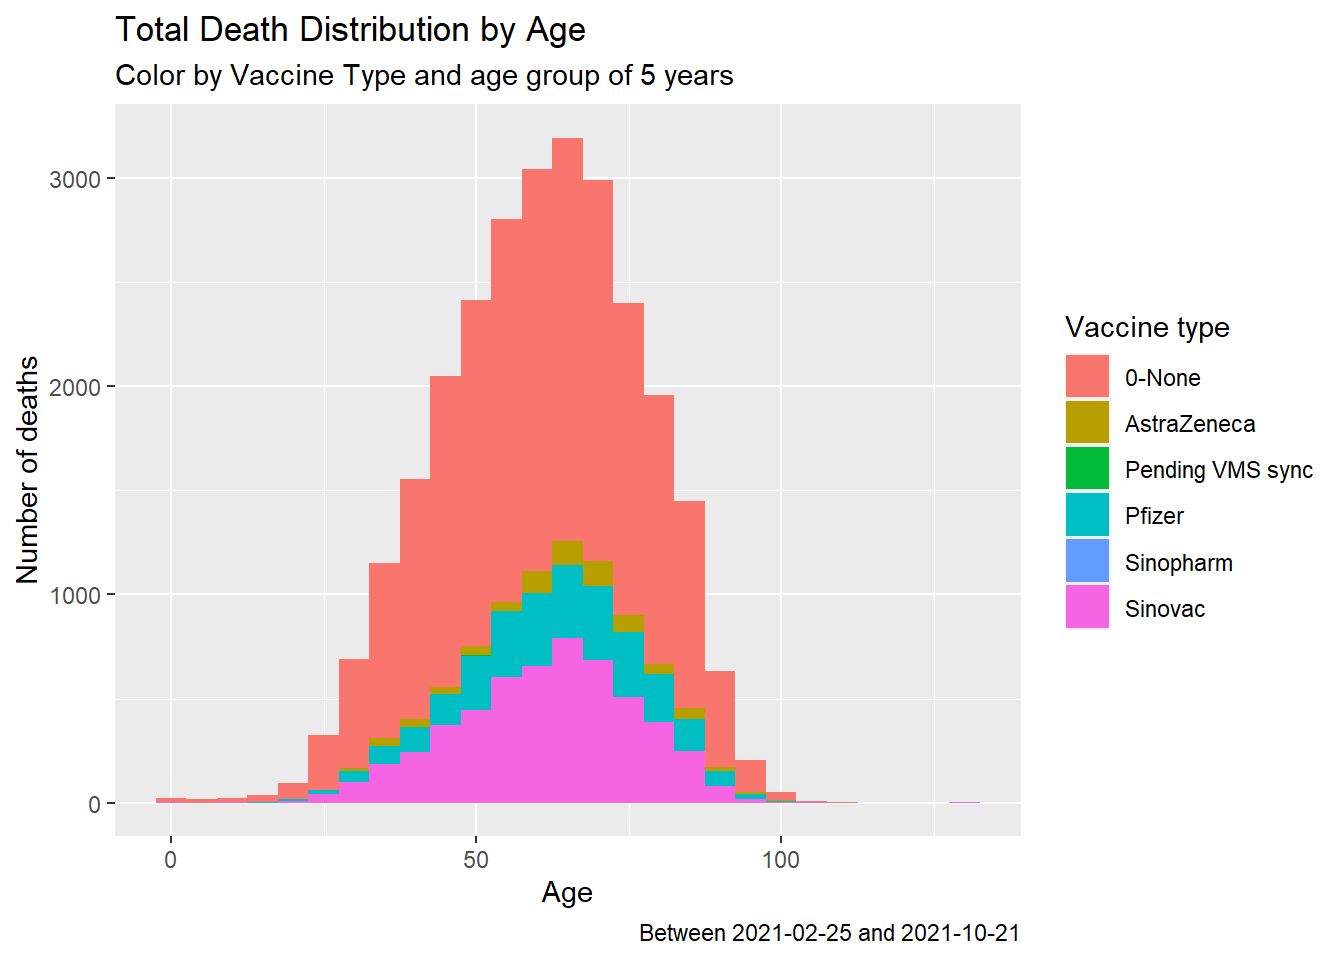 Summary distribution of Covid deaths by age group and vaccine type